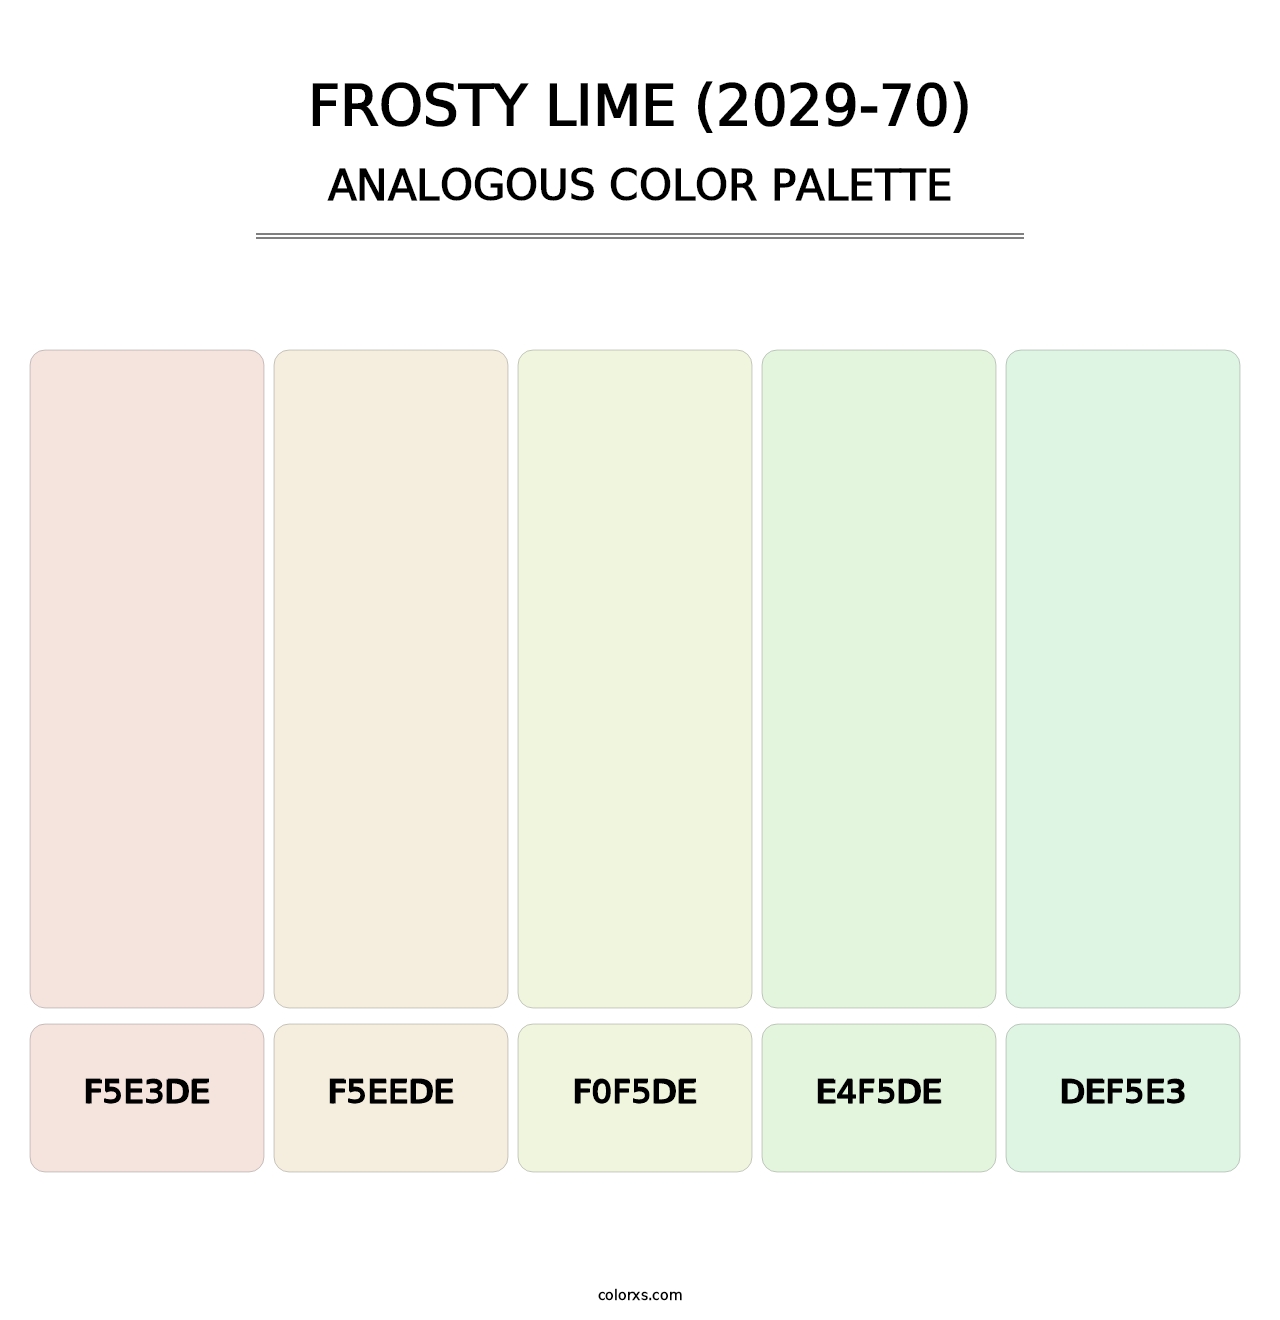 Frosty Lime (2029-70) - Analogous Color Palette